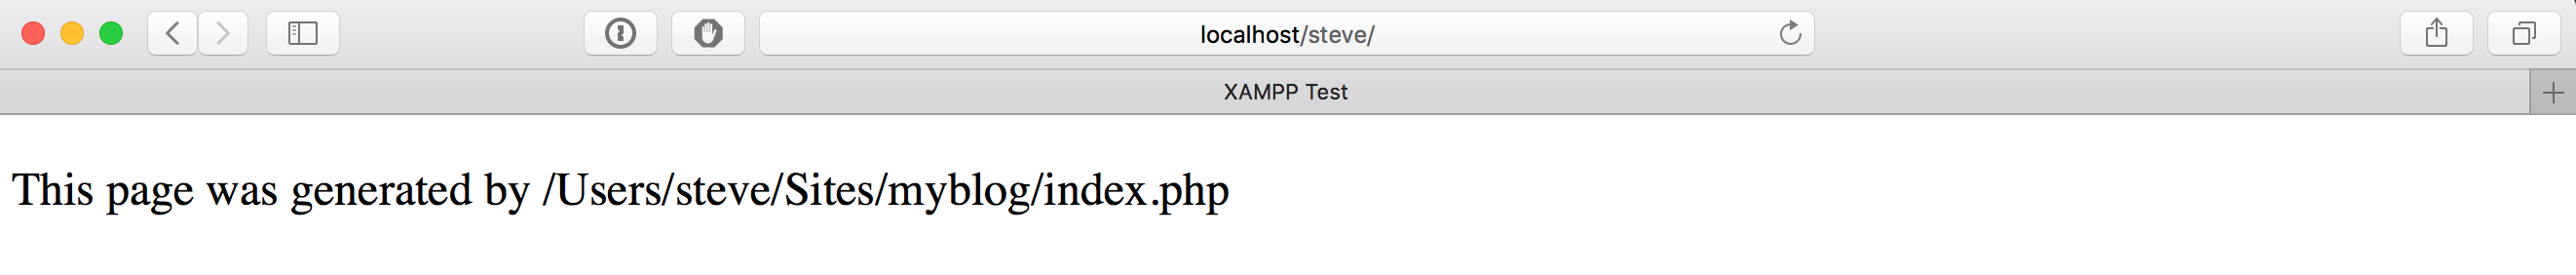 Test page for localhost/steve alaised to /Users/steve/Sites/mysite